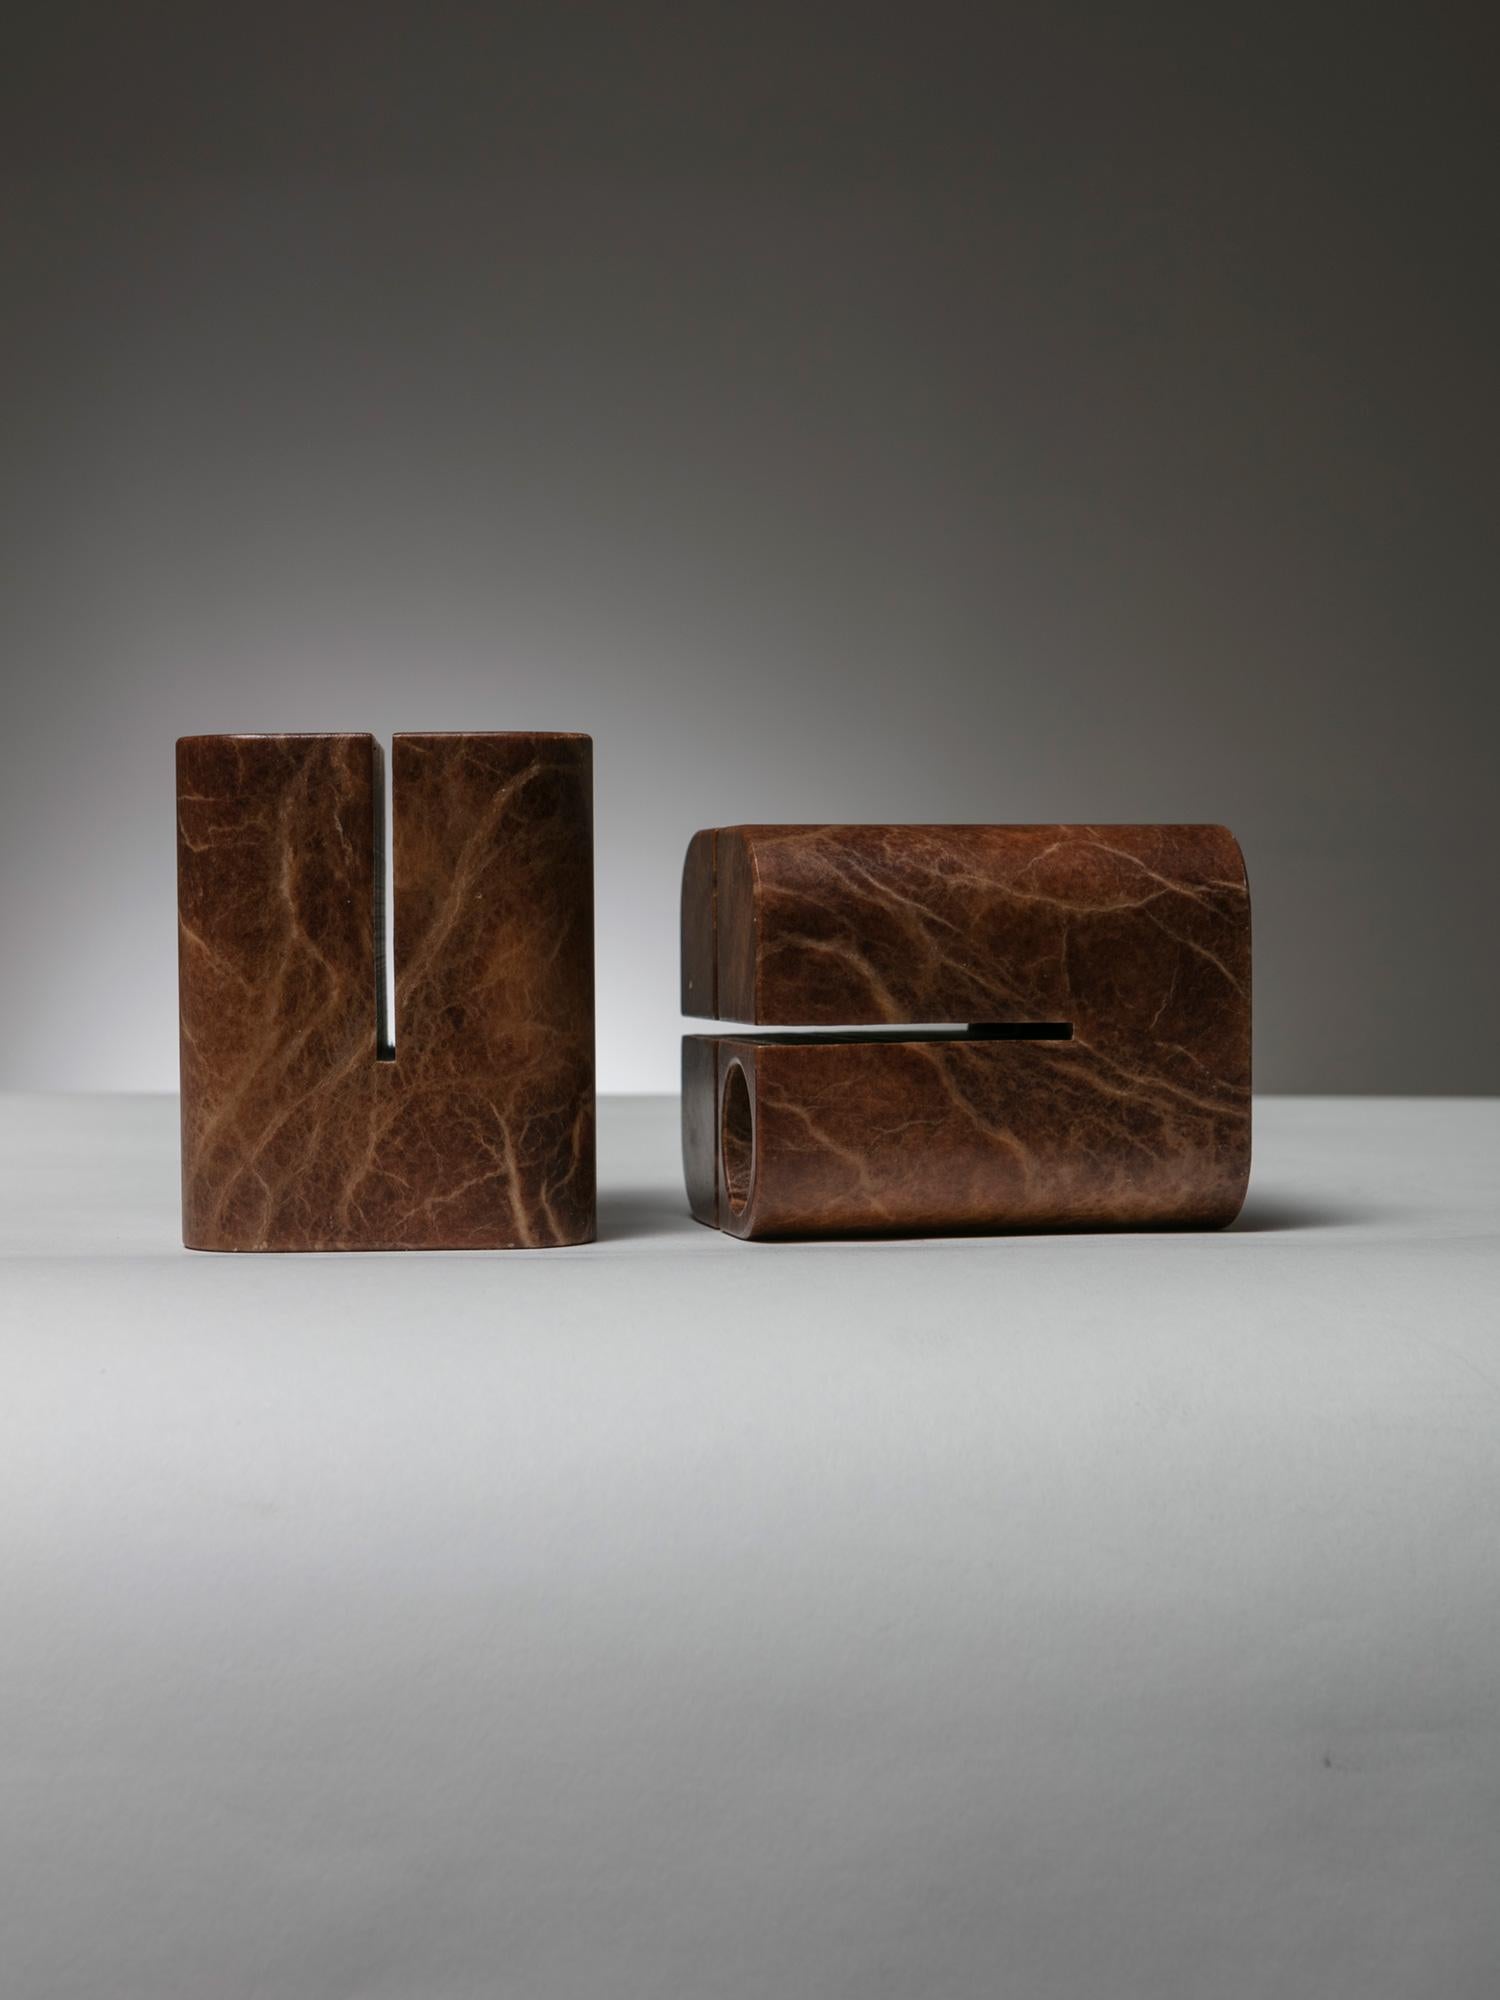 Set of two-stone pieces by Lelo Cremonesi.
Two orthogonal cuts and a round hole for several possible functions.